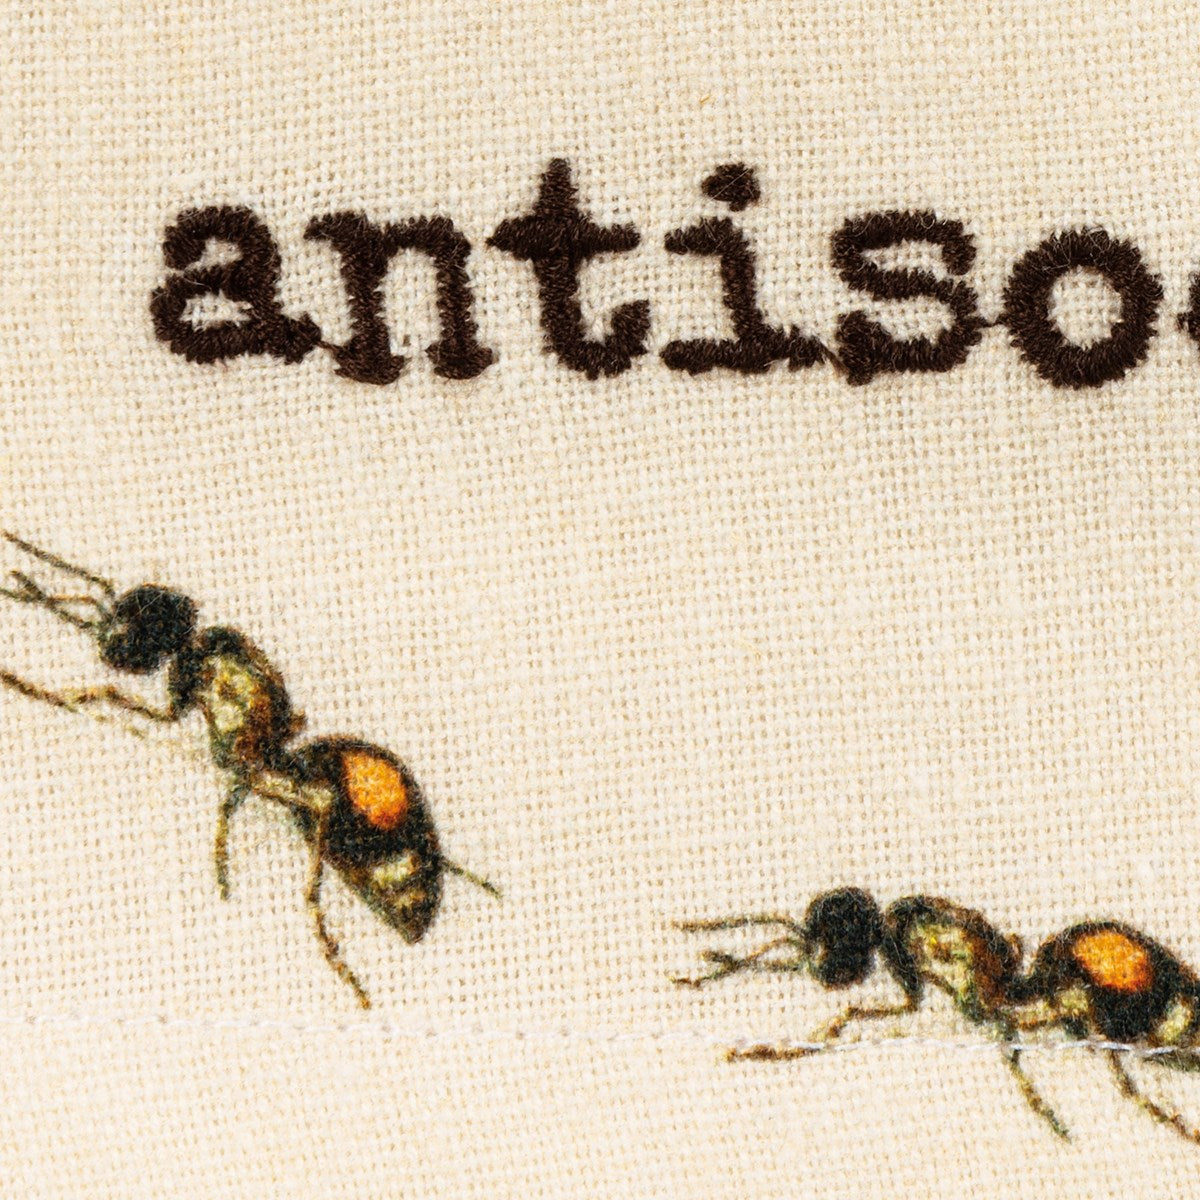 close-up of embroidered "antisocial" and ant graphic.